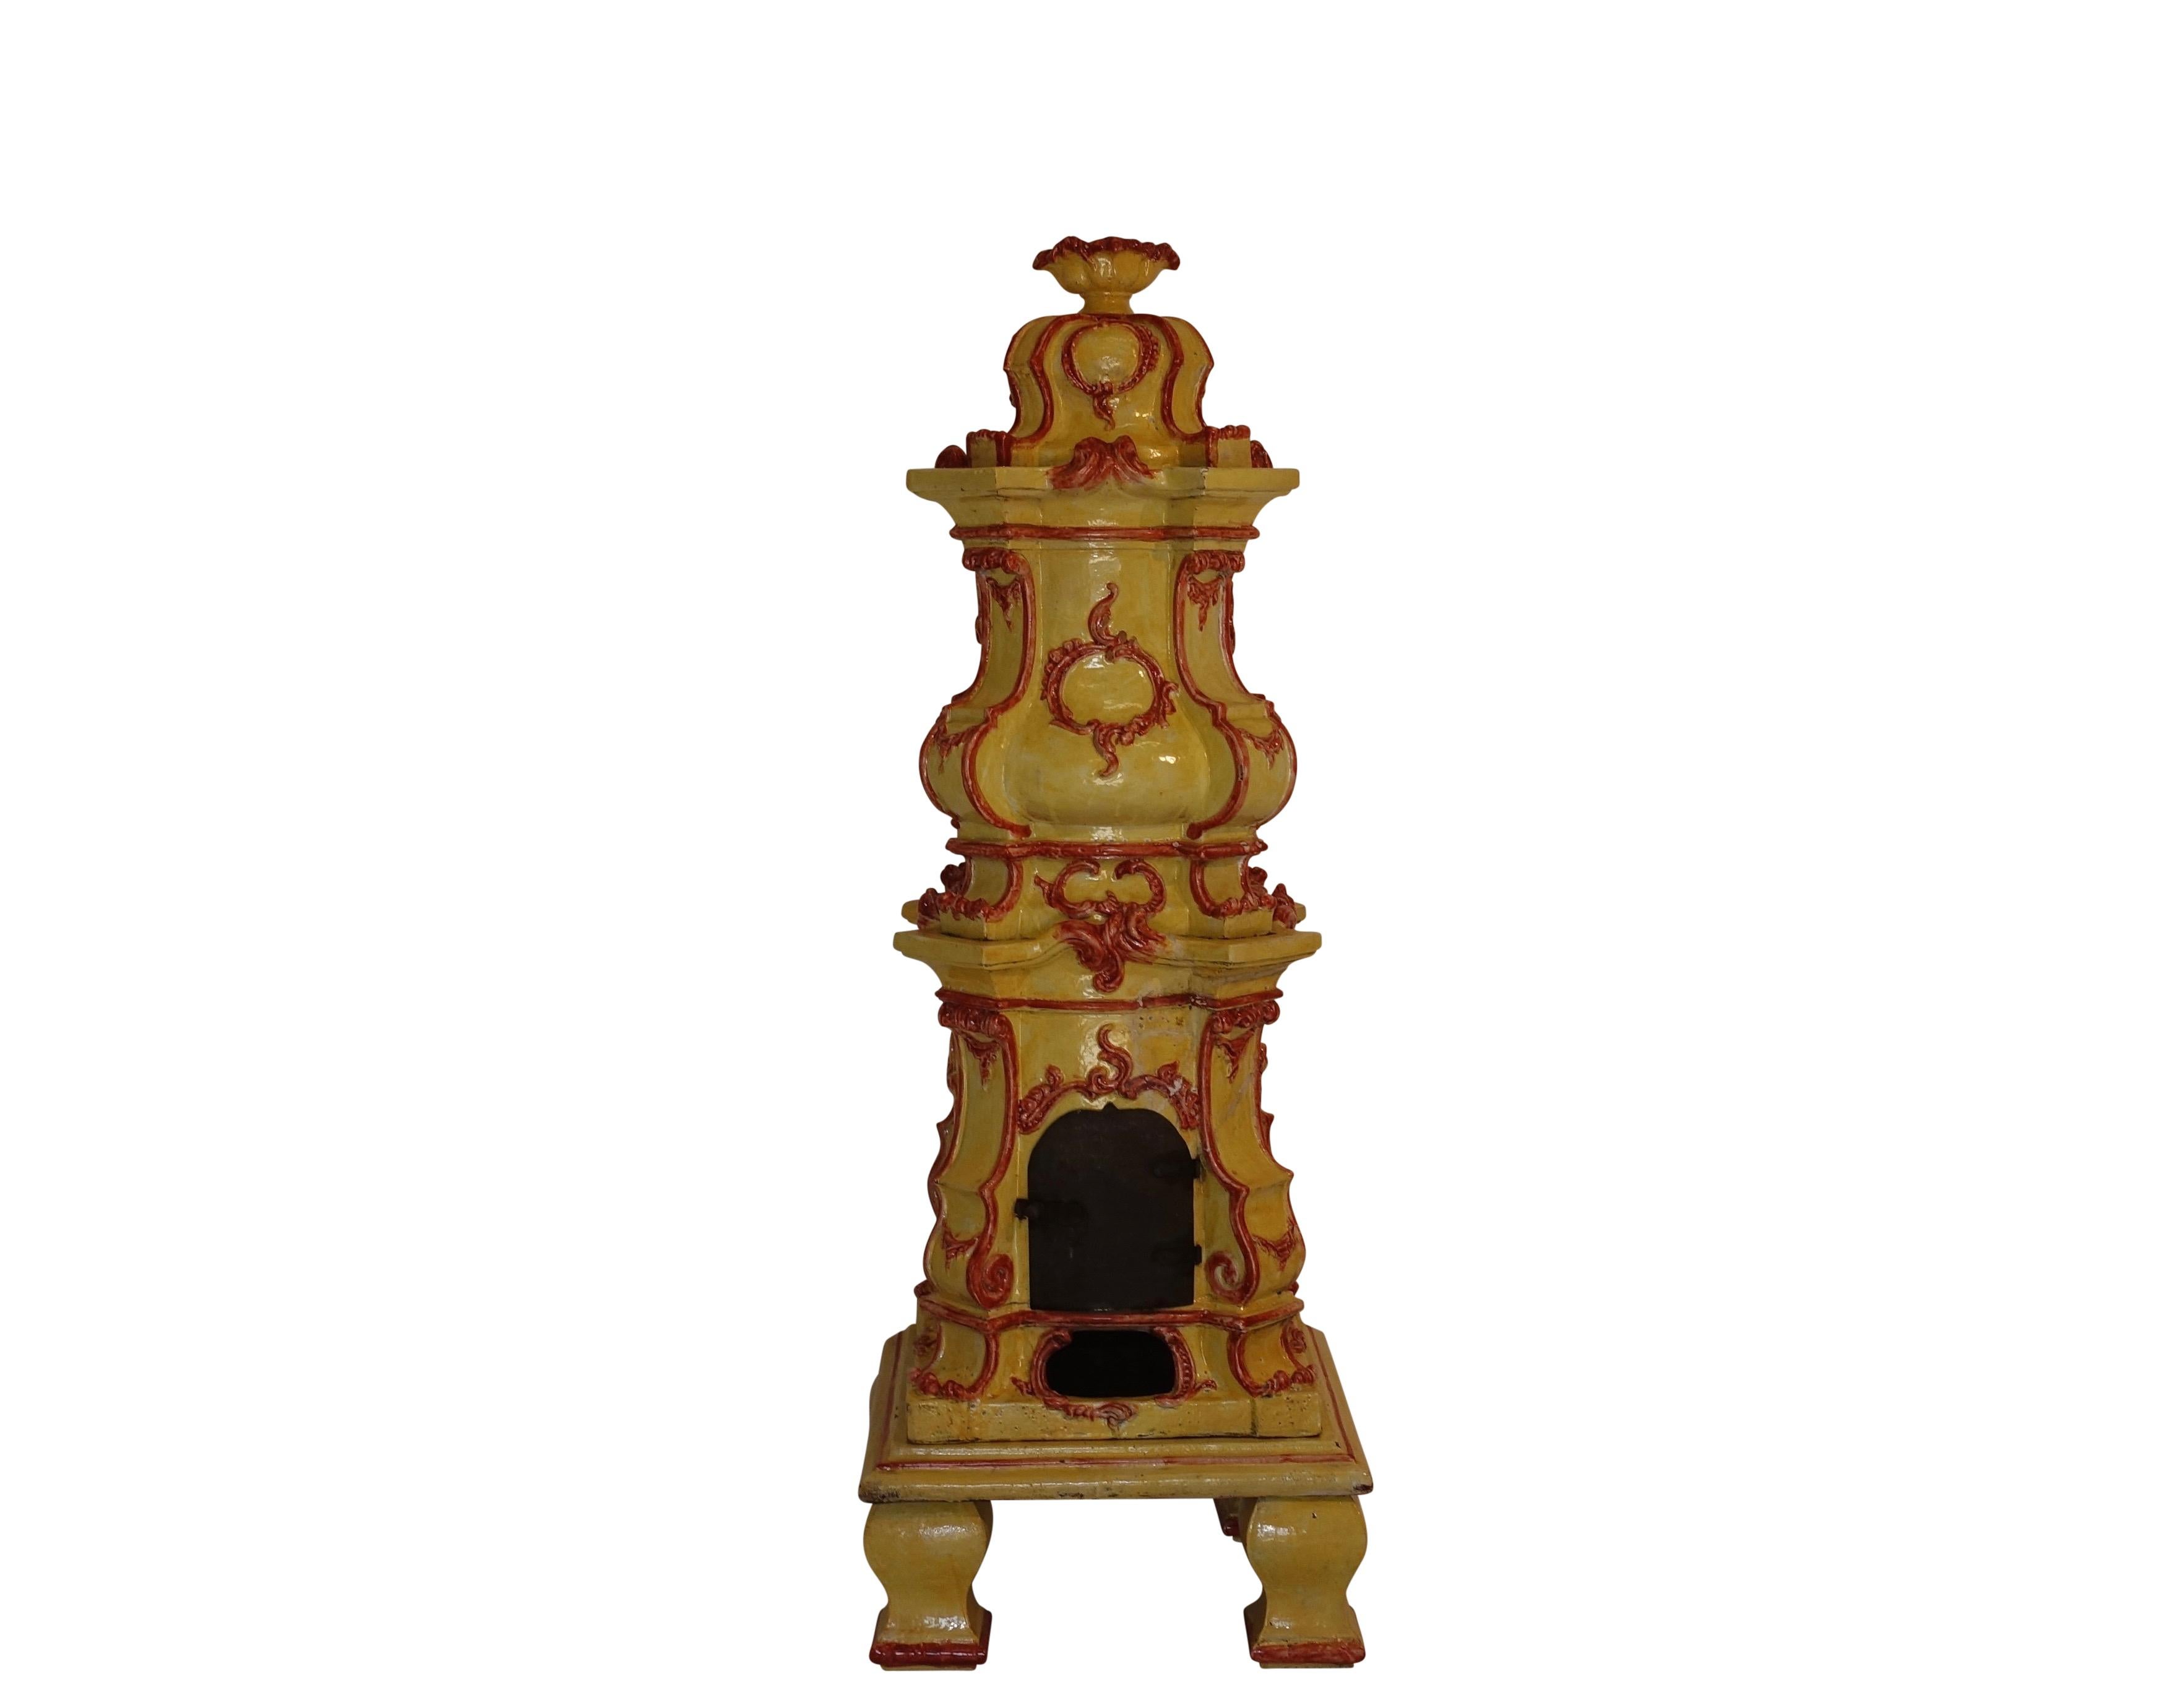 Ornate finial above serpentine and bombe sections modeled with scrolling foliage rocaille cartouches and ornamentation. Hinged cast iron door on firebox resting upon flat plate and four block feet. Stove is in six sections.
European, 19th century.